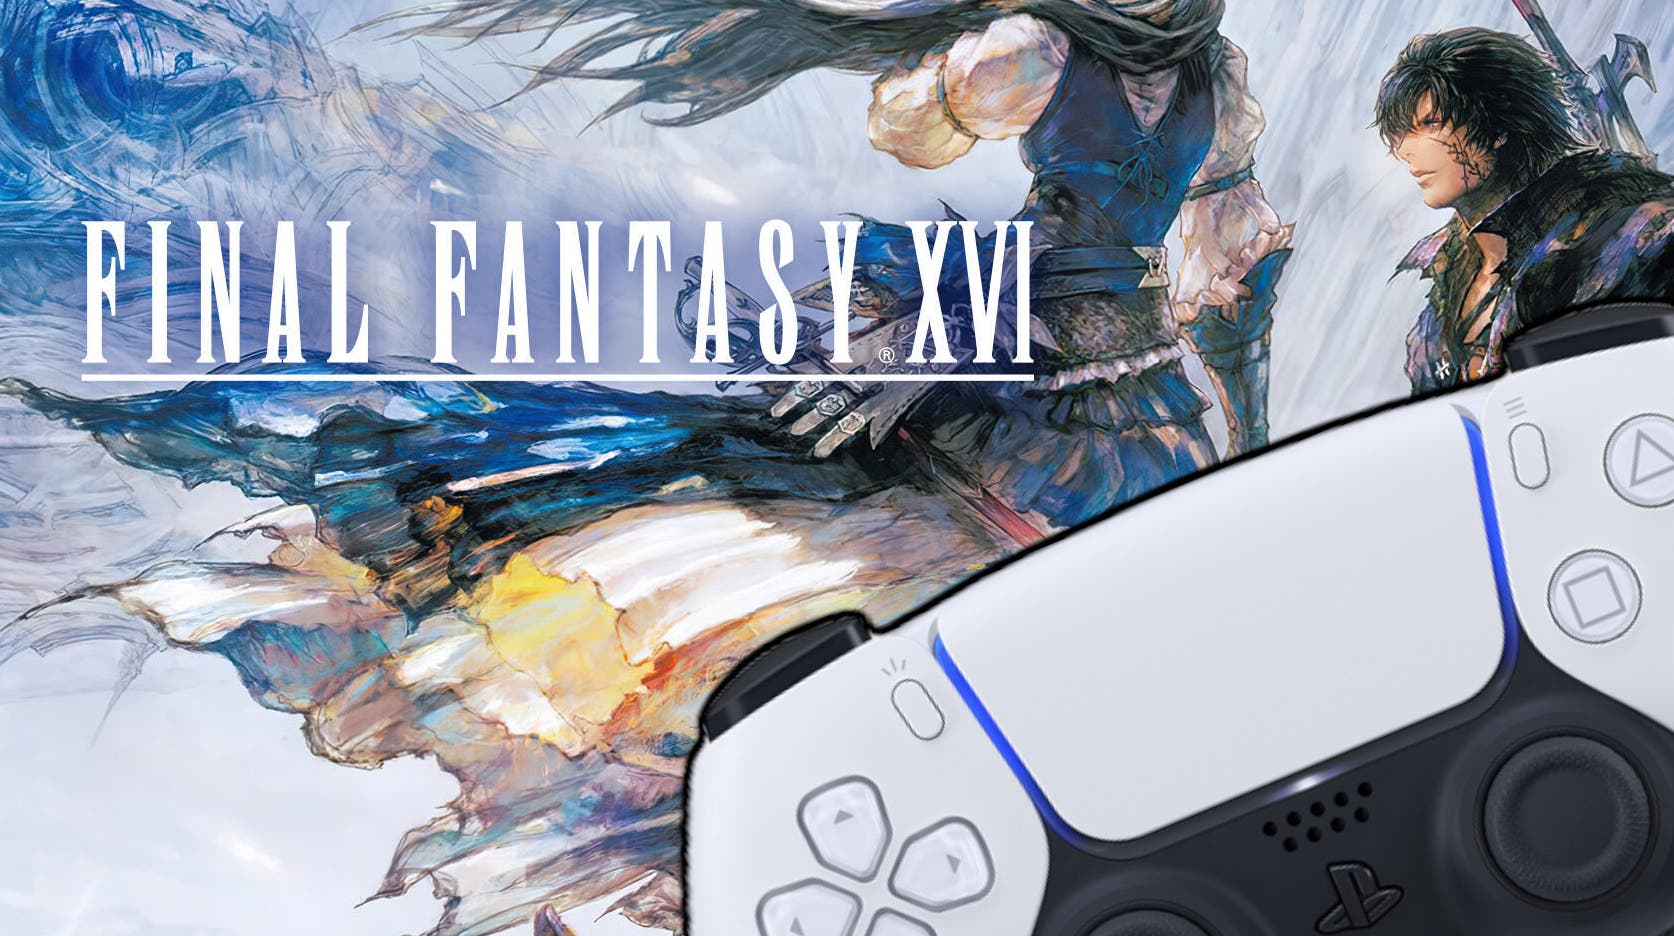 Final Fantasy XVI reveals how it will use the PS5 DualSense and it looks very good